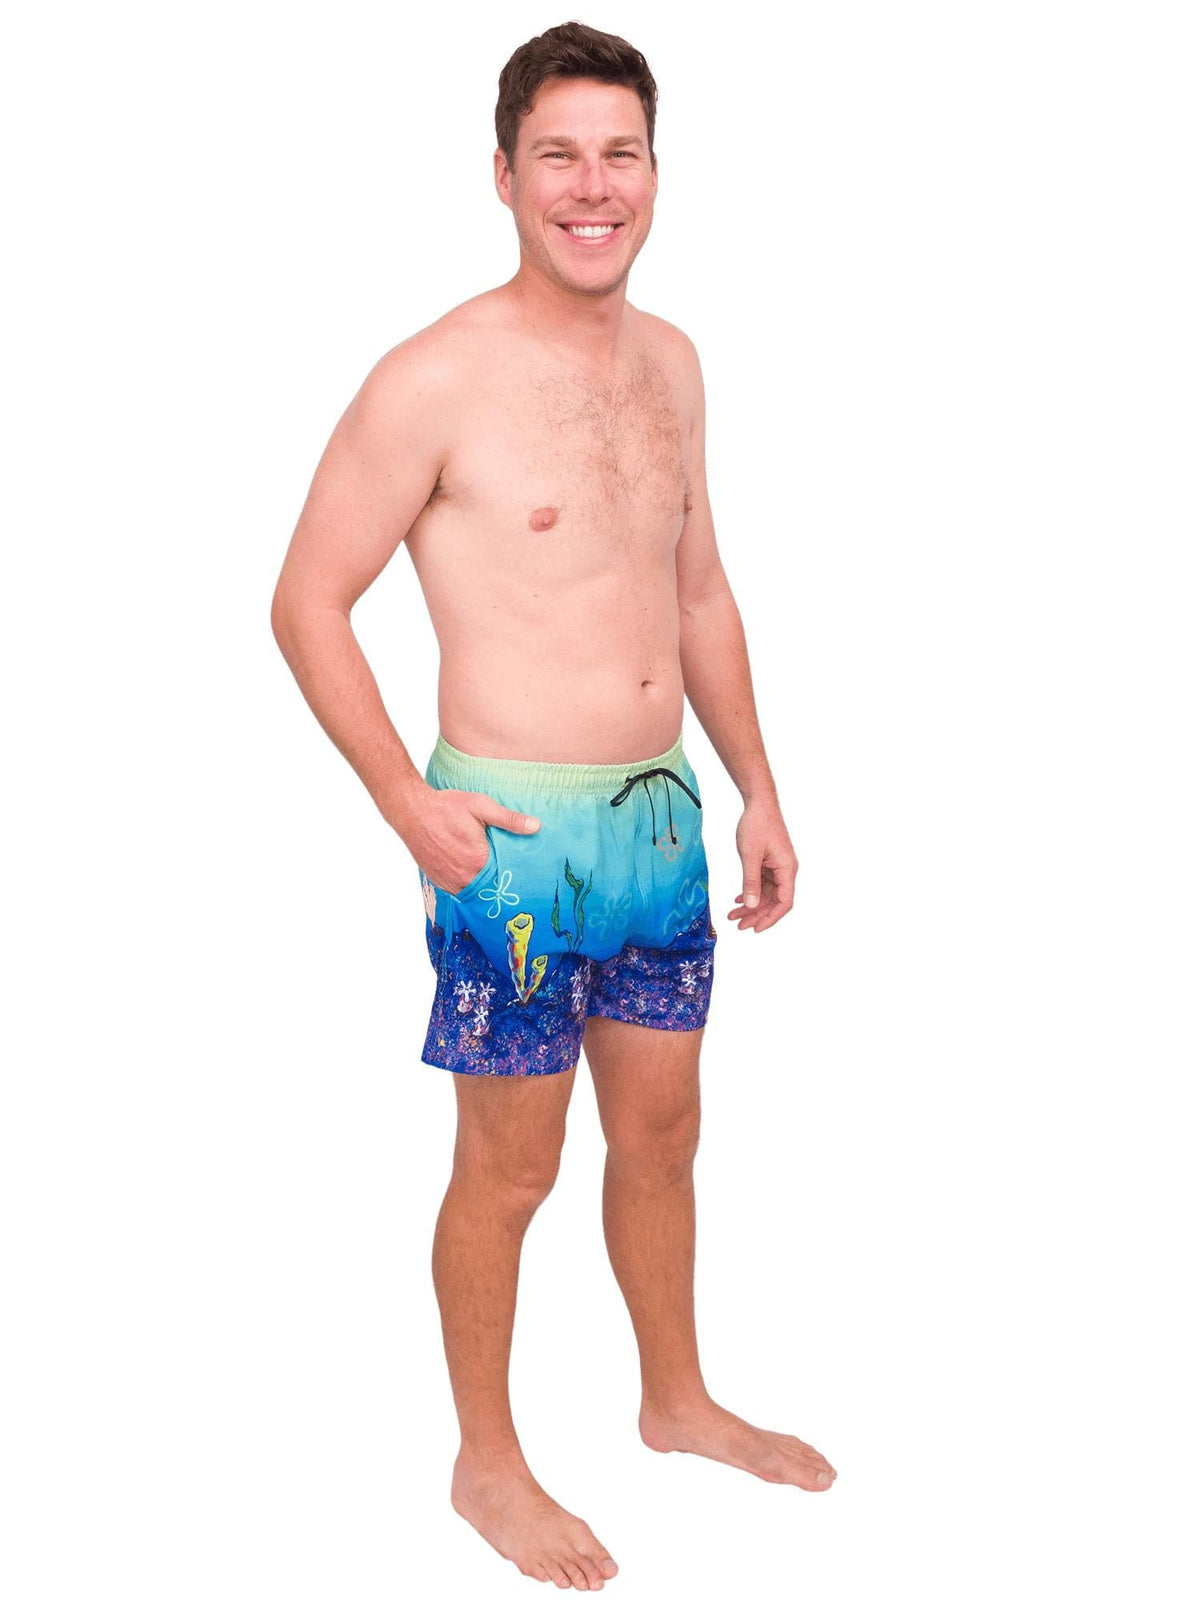 Model: Dalton is a coral biologist who studies the relationship between communities and reef ecosystems. He is 6’3”, 200lbs and is wearing a size L.